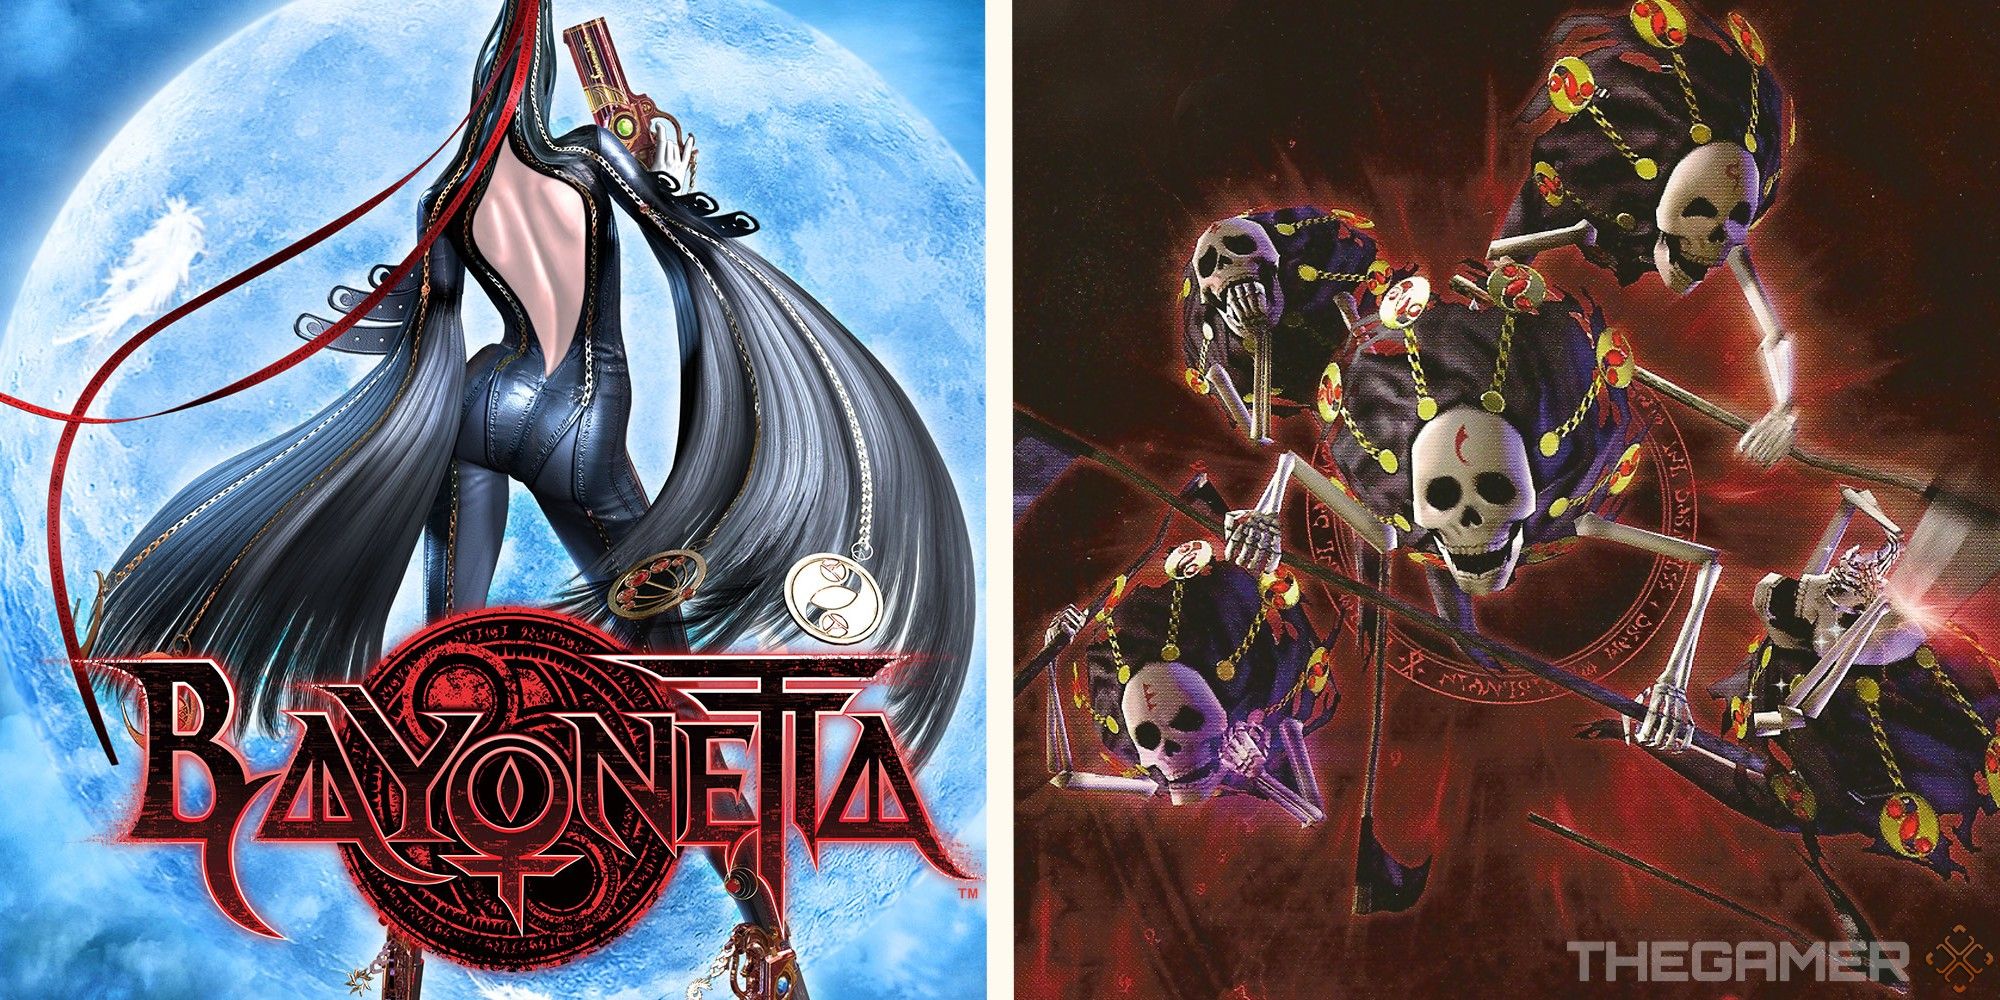 promotional image of bayonetta next to image of zero and the little devils